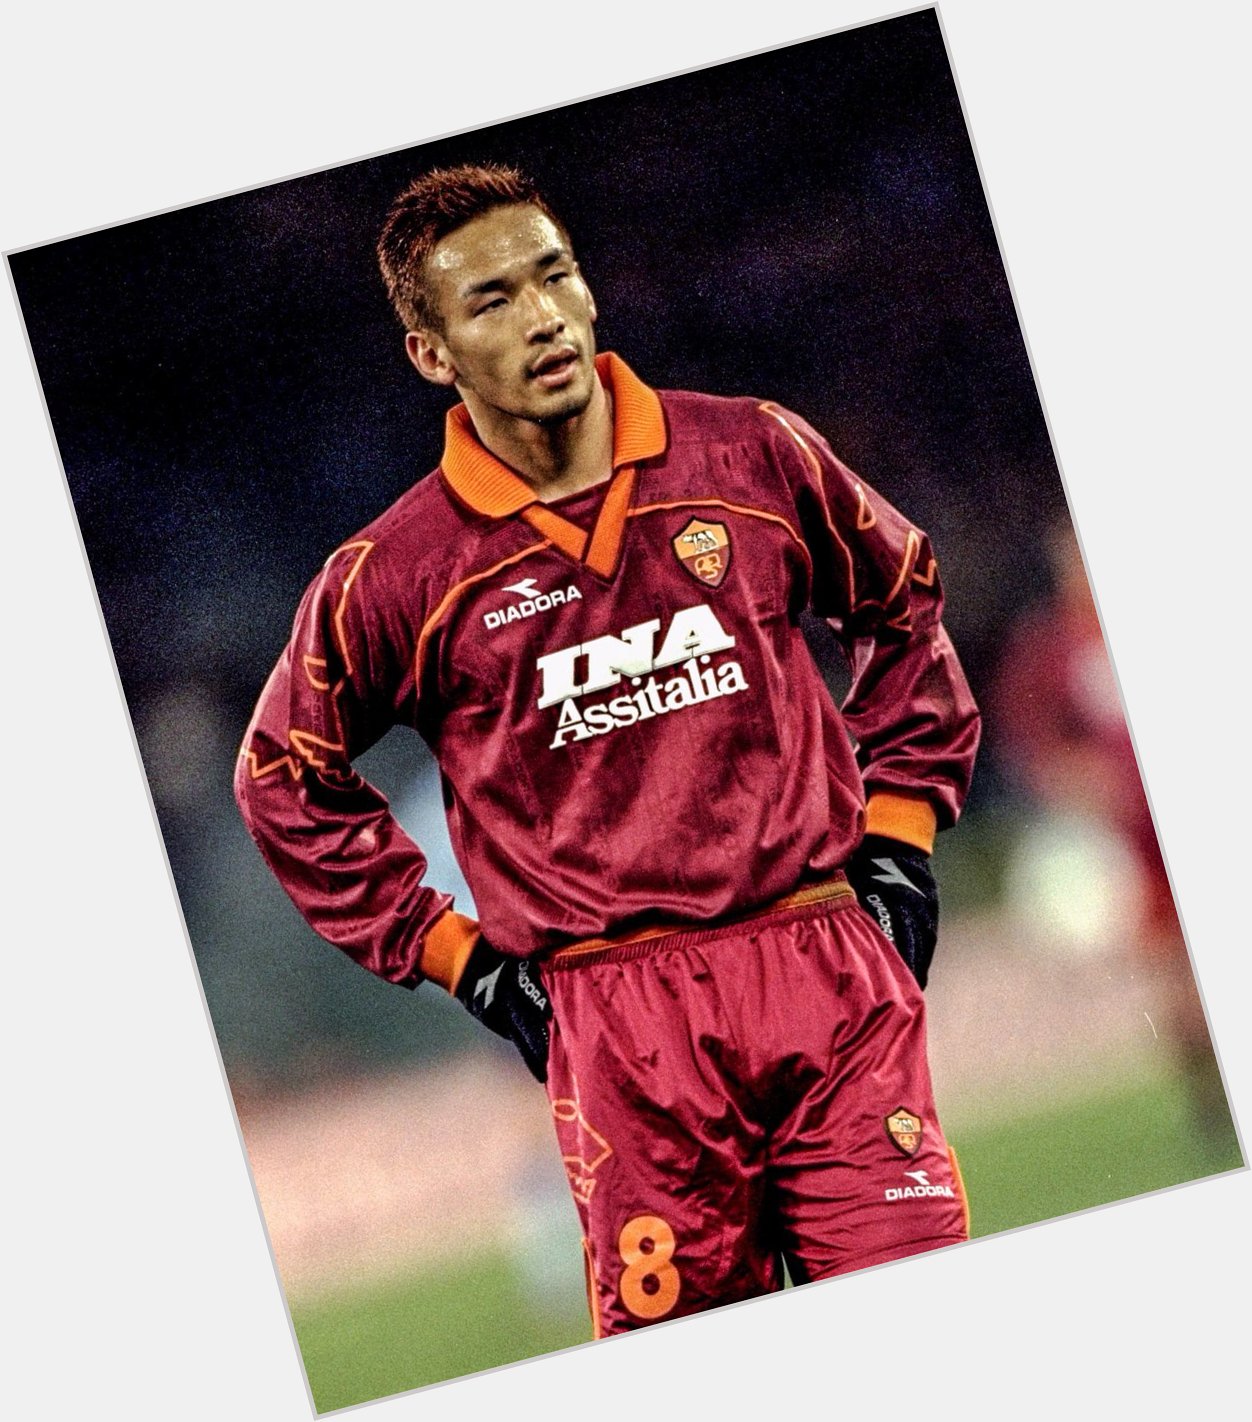 Happy birthday to a player who has donned some exceptional kits throughout his career...Hidetoshi Nakata.  